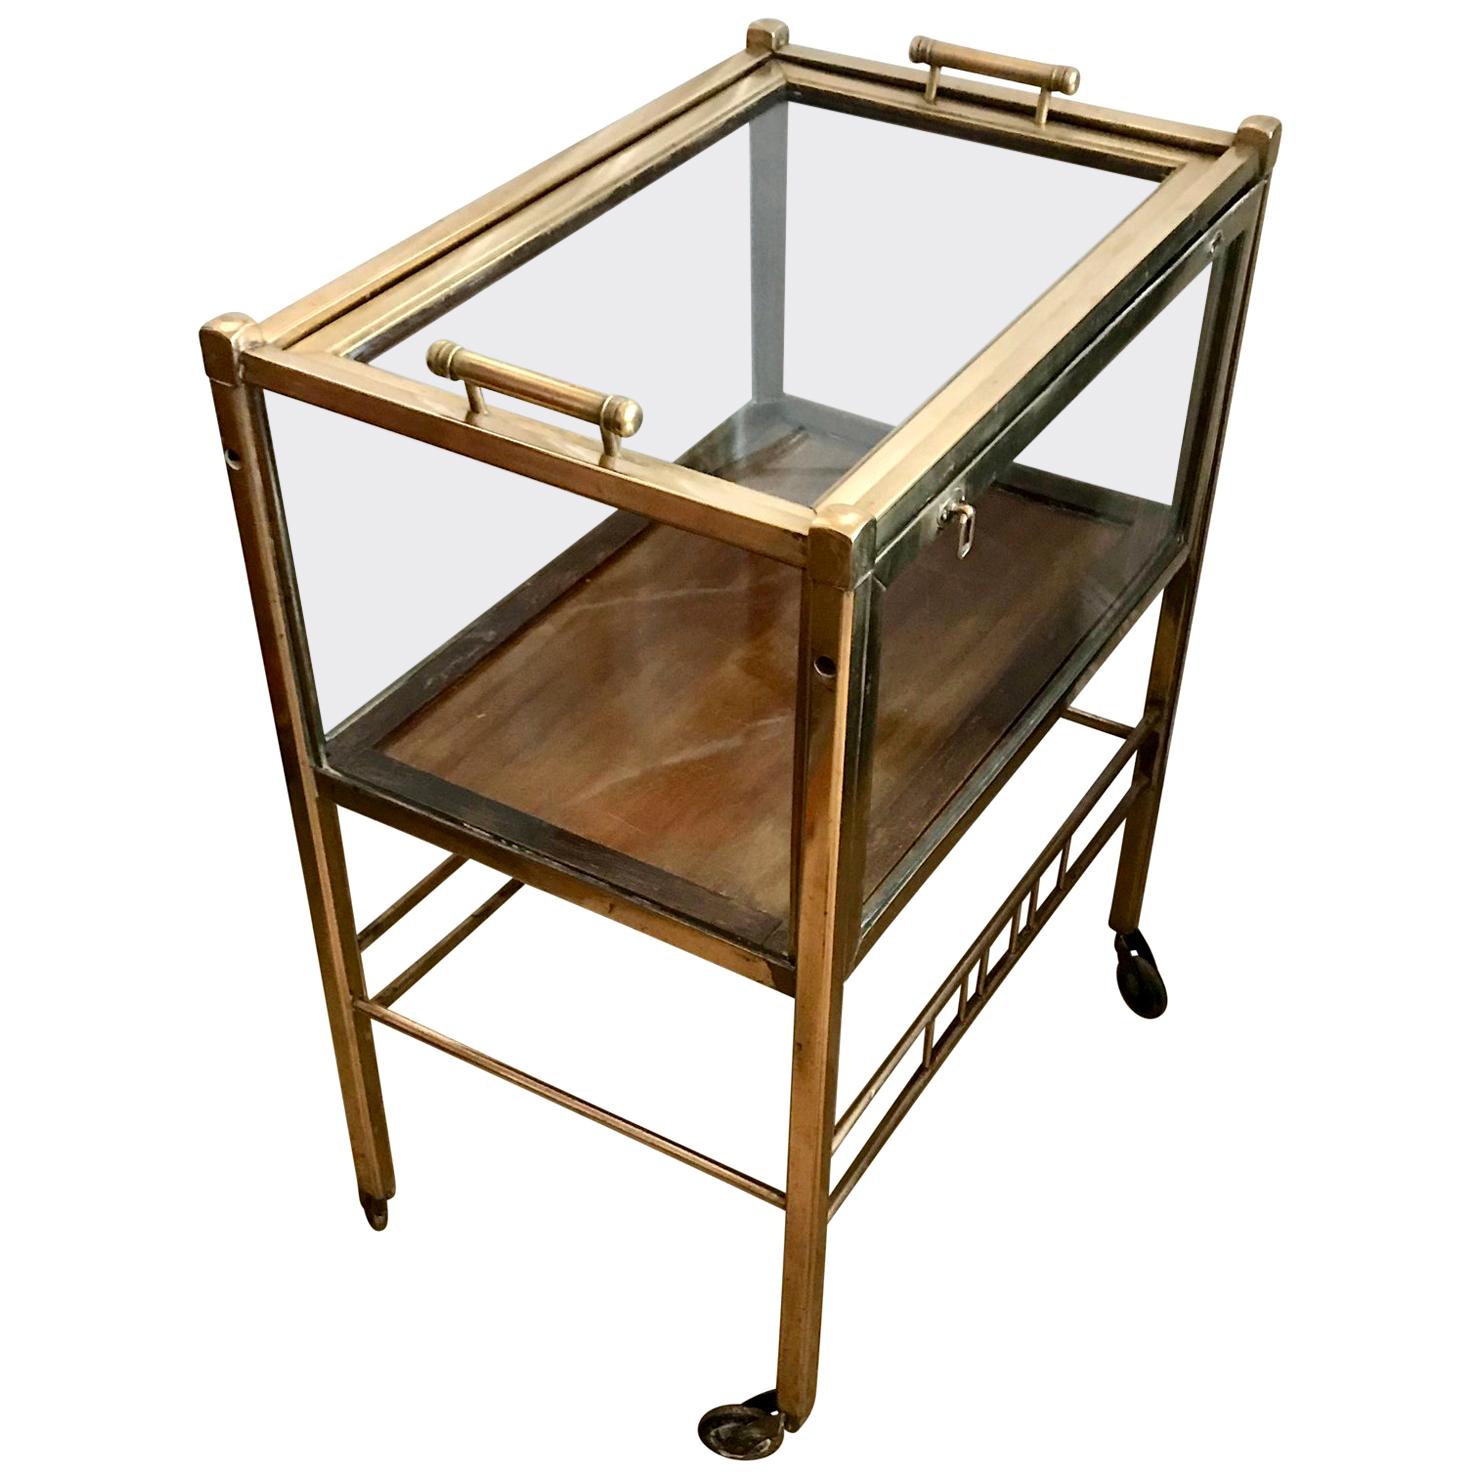 Art Deco Brass and Wood Bar Cart Trolley by Ernst Rockhausen, Germany, 1920s